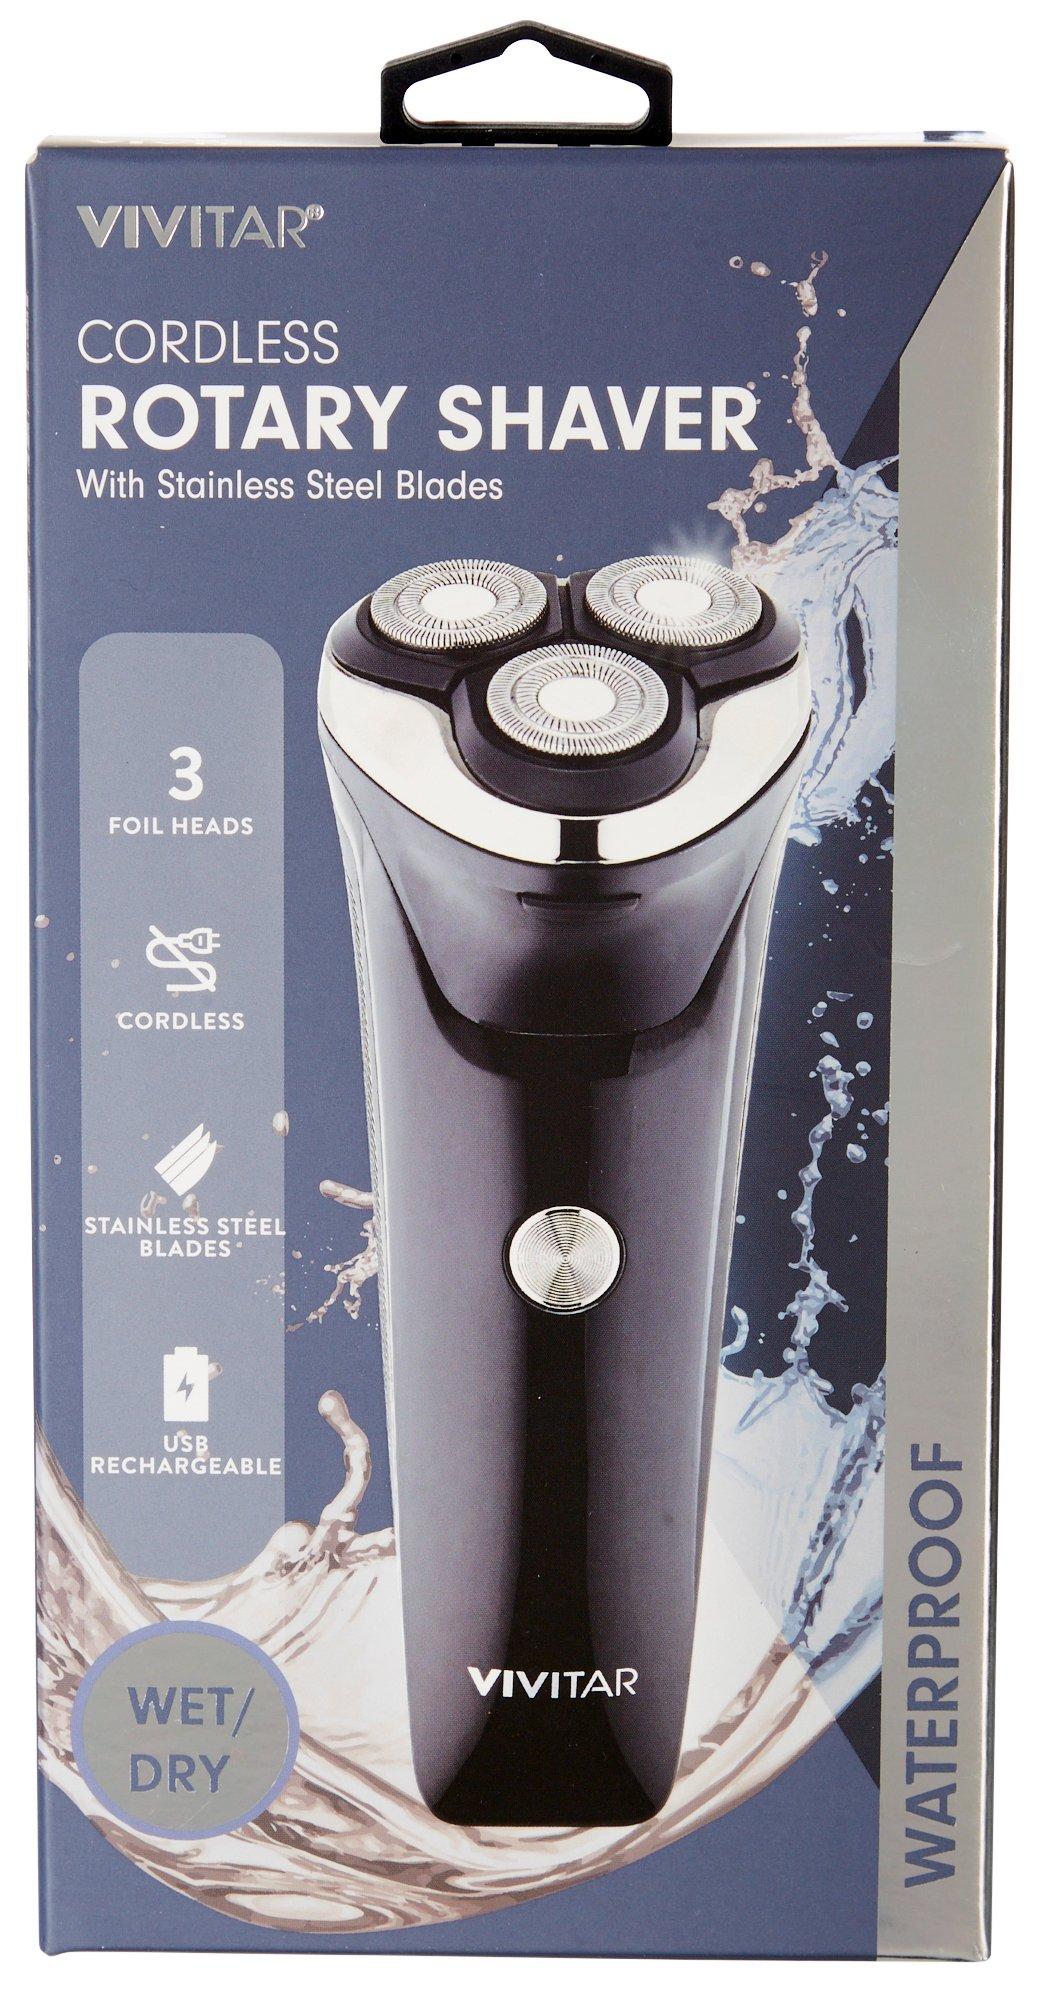 Rotary 3 Foil Head Cordless Rechargeable Shaver